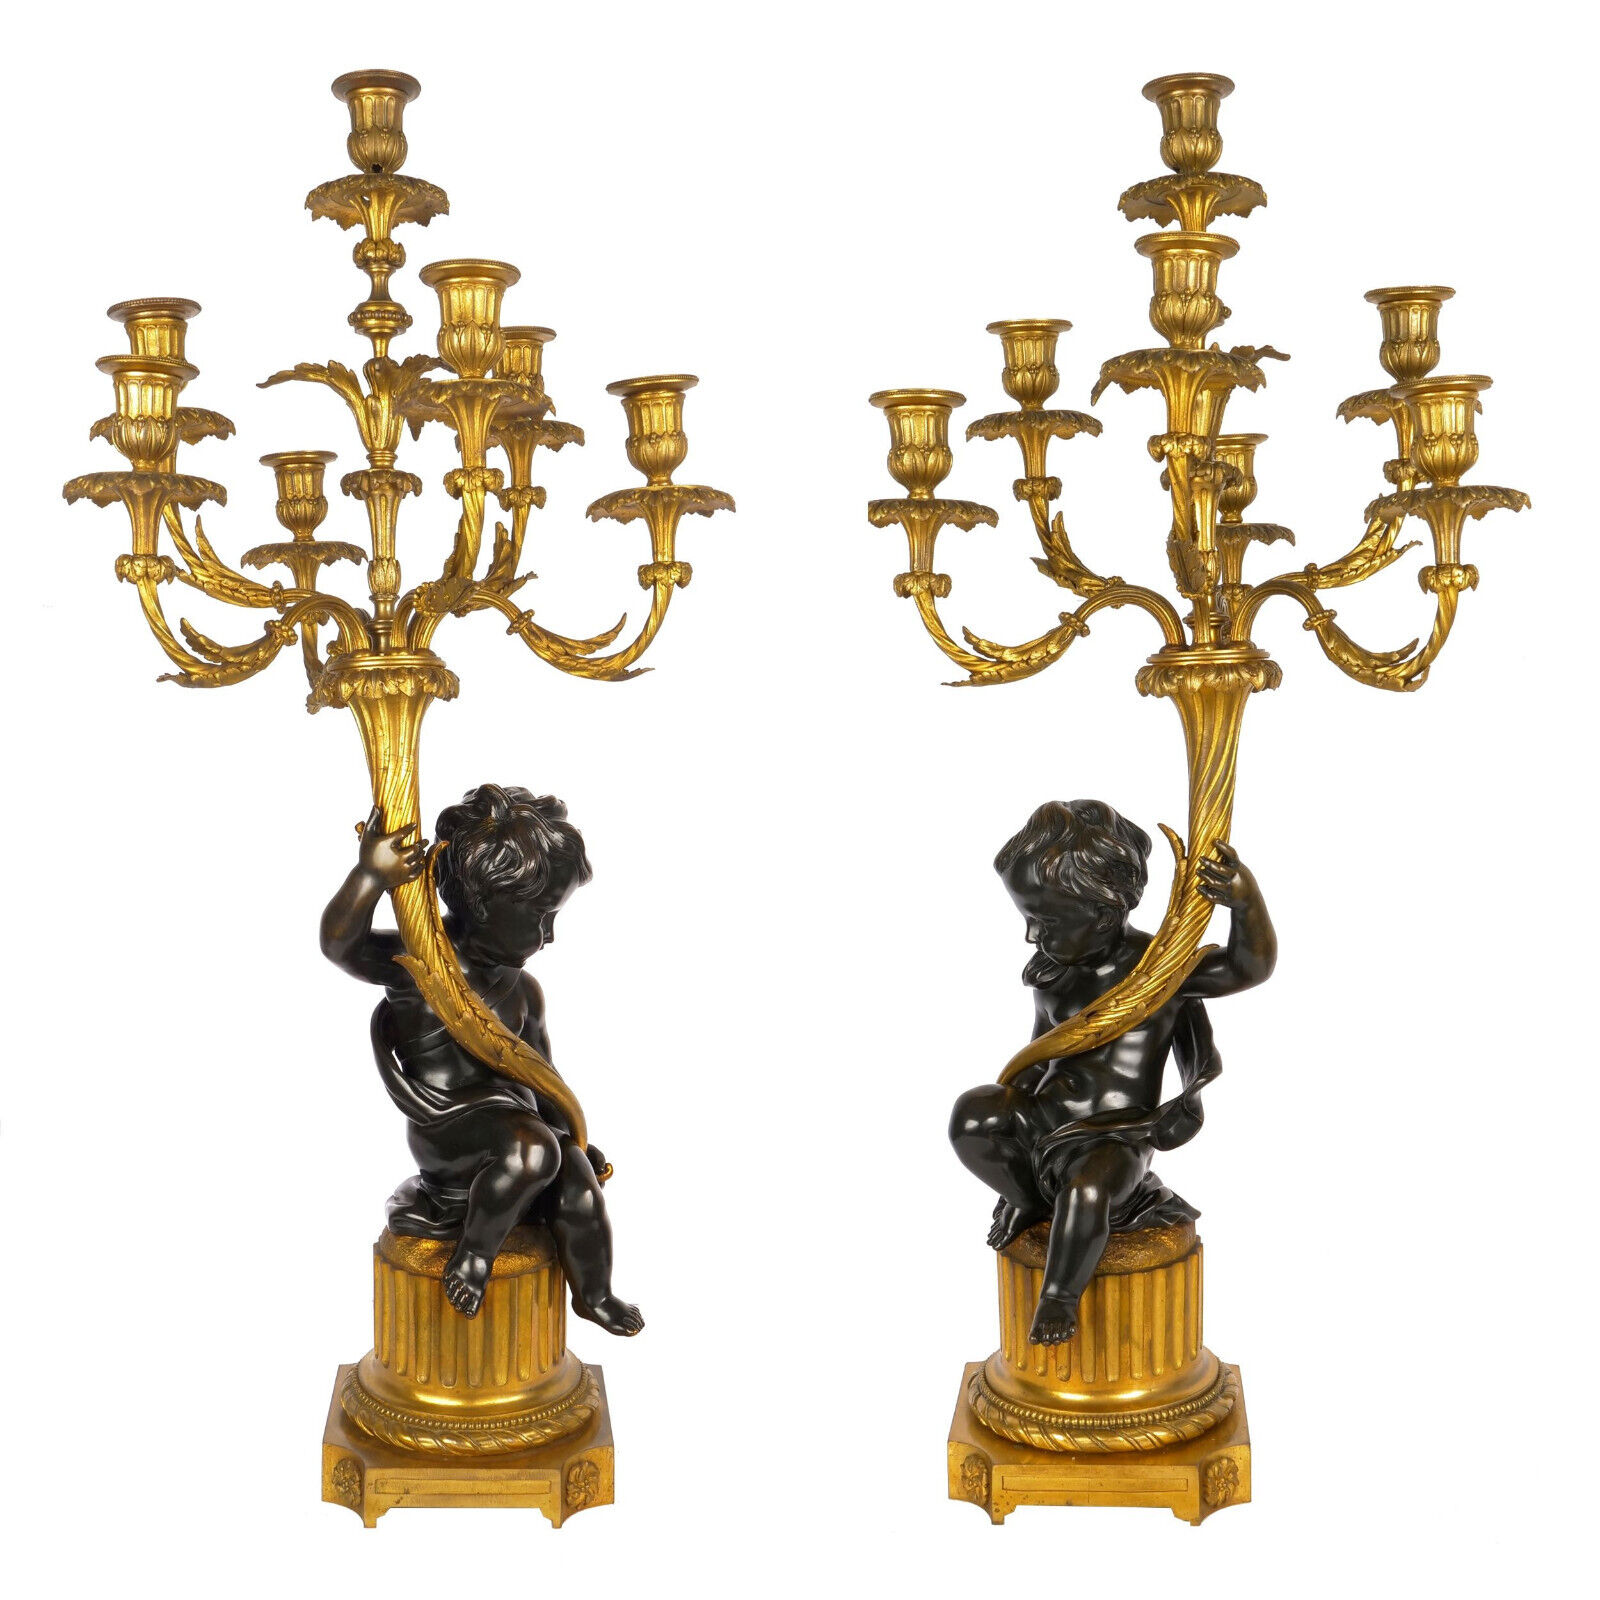 Pair of French Bronze Figural Sculpture Seven-Light Candelabra Lamps, c. 1870-90